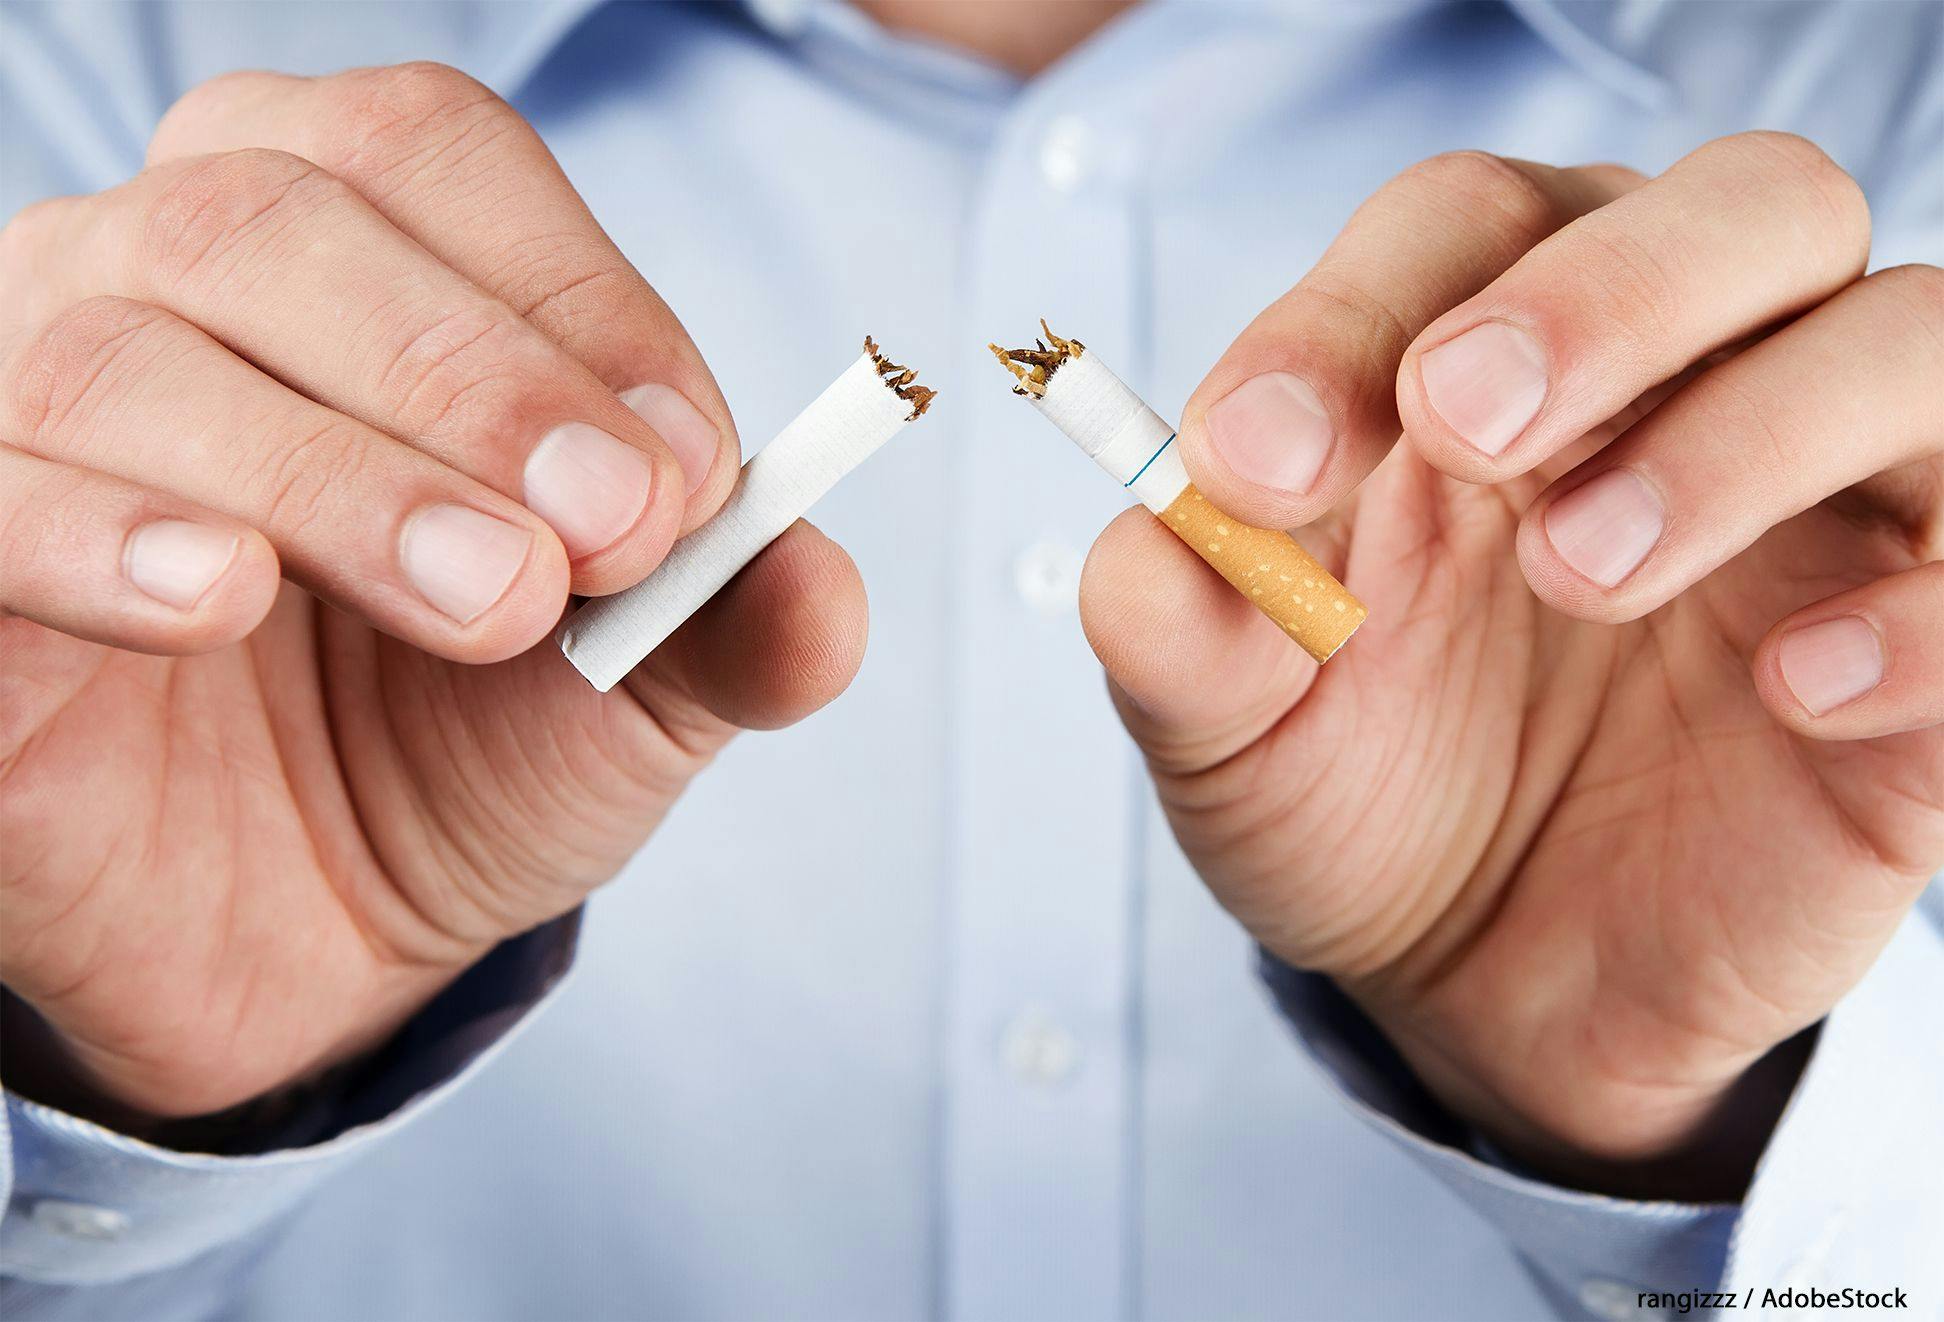 Smoking rate in underserved communities double that of general population, study says